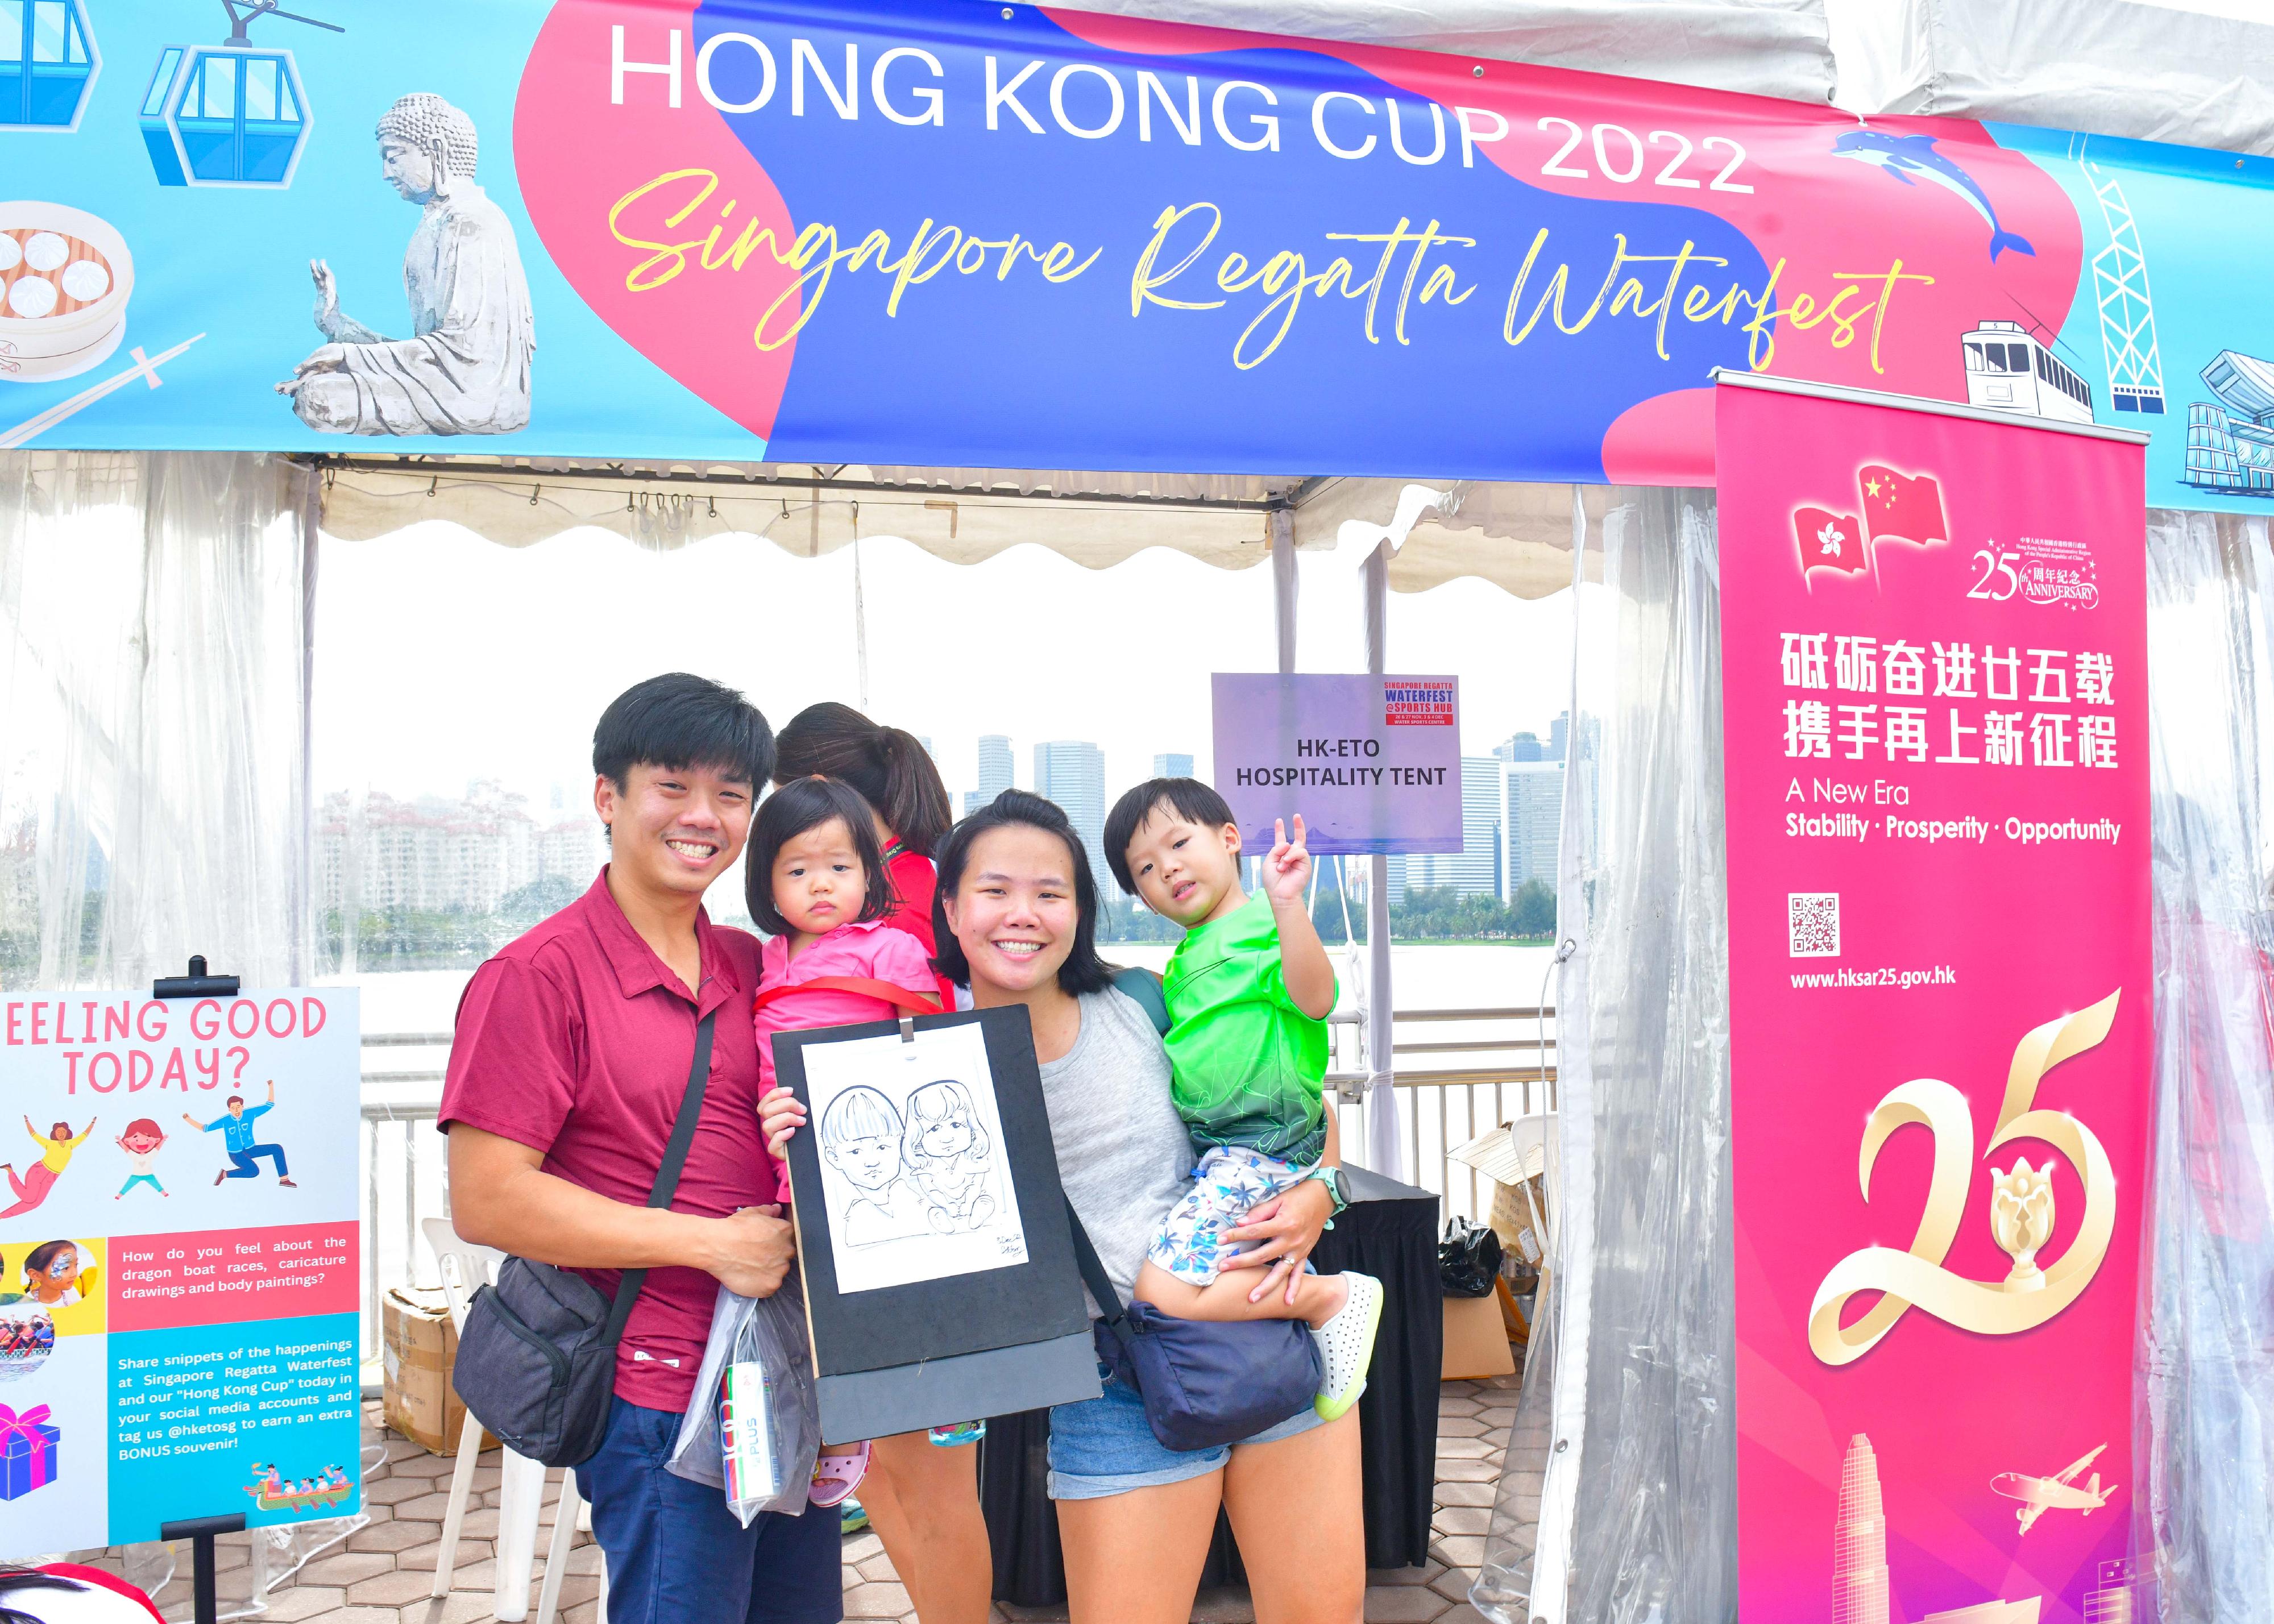 The Hong Kong Economic and Trade Office in Singapore (Singapore ETO) hosted the Hong Kong Cup 2022 dragon boat races during the Singapore Regatta Waterfest yesterday and today (December 3 and 4) to celebrate the 25th anniversary of the establishment of the Hong Kong Special Administrative Region. The Singapore ETO set up a booth at the venue to promote Hong Kong, distribute souvenirs and provide activities like caricature drawing for visitors.